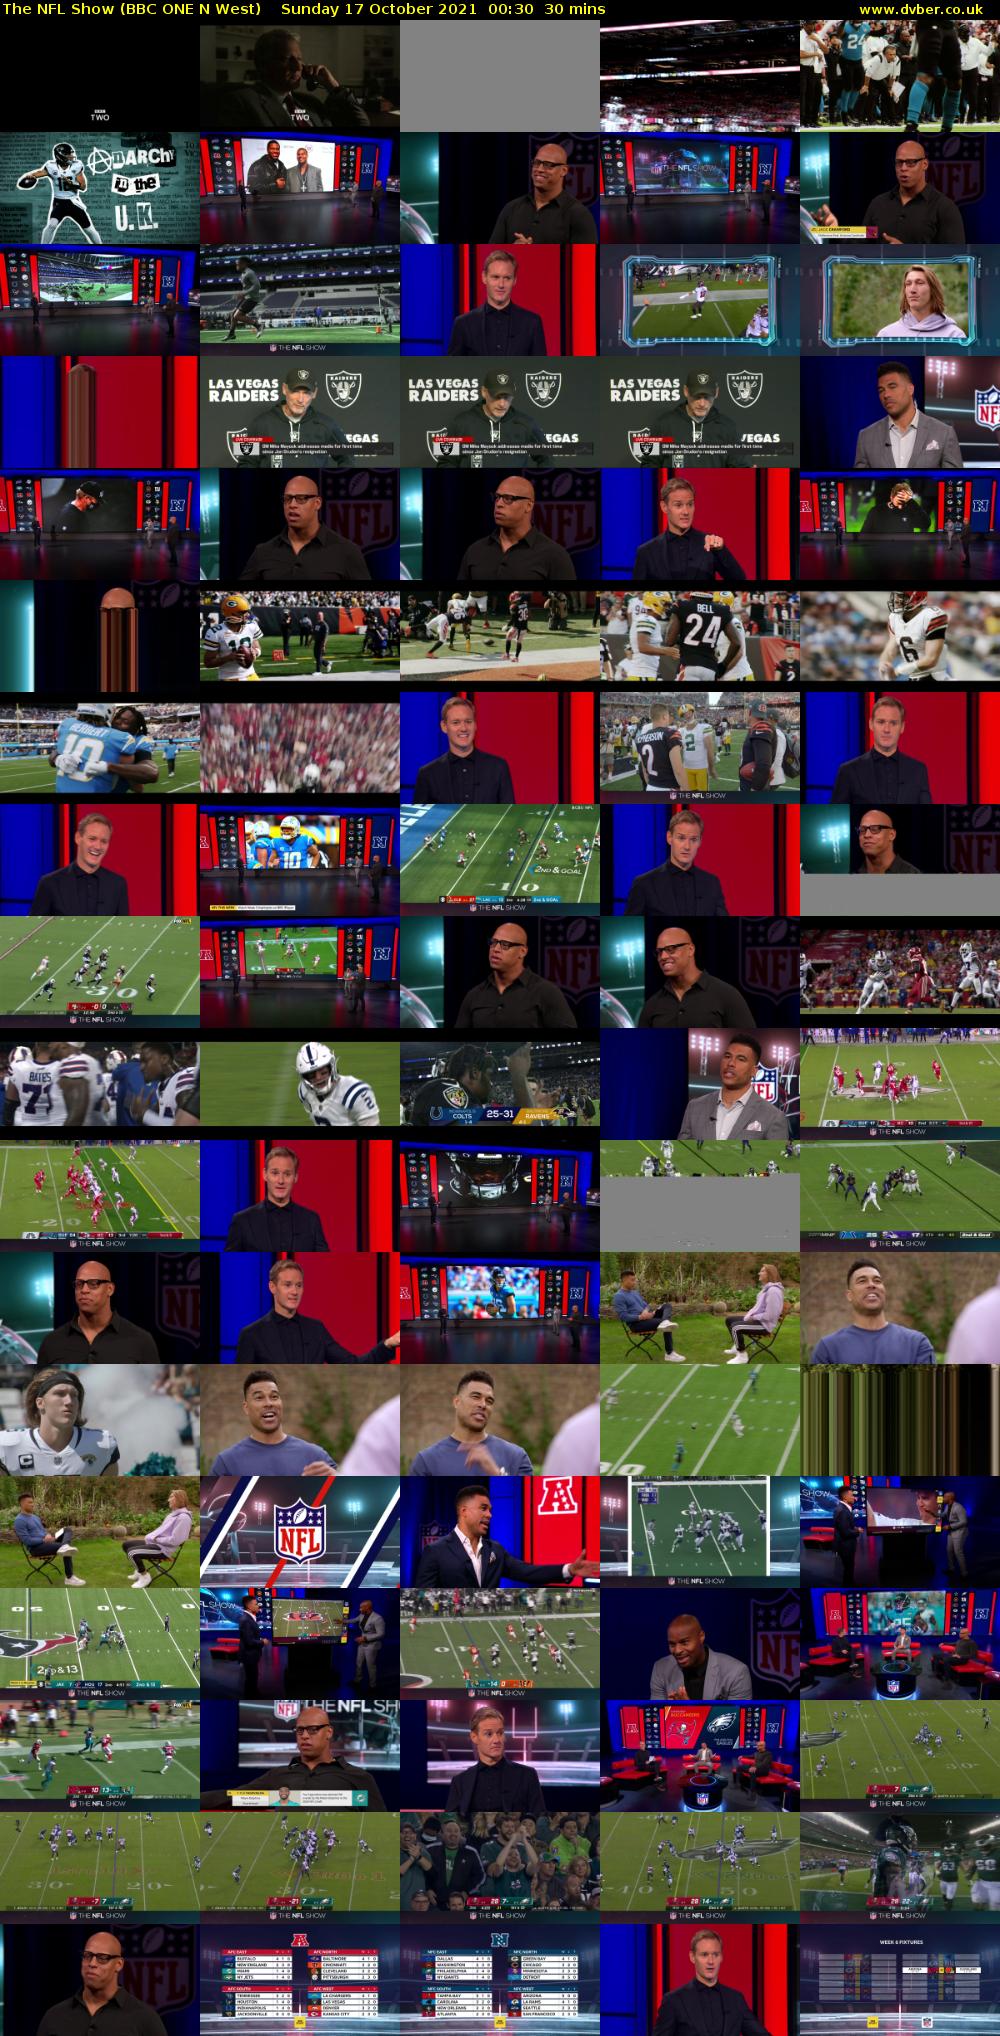 The NFL Show (BBC ONE N West) Sunday 17 October 2021 00:30 - 01:00